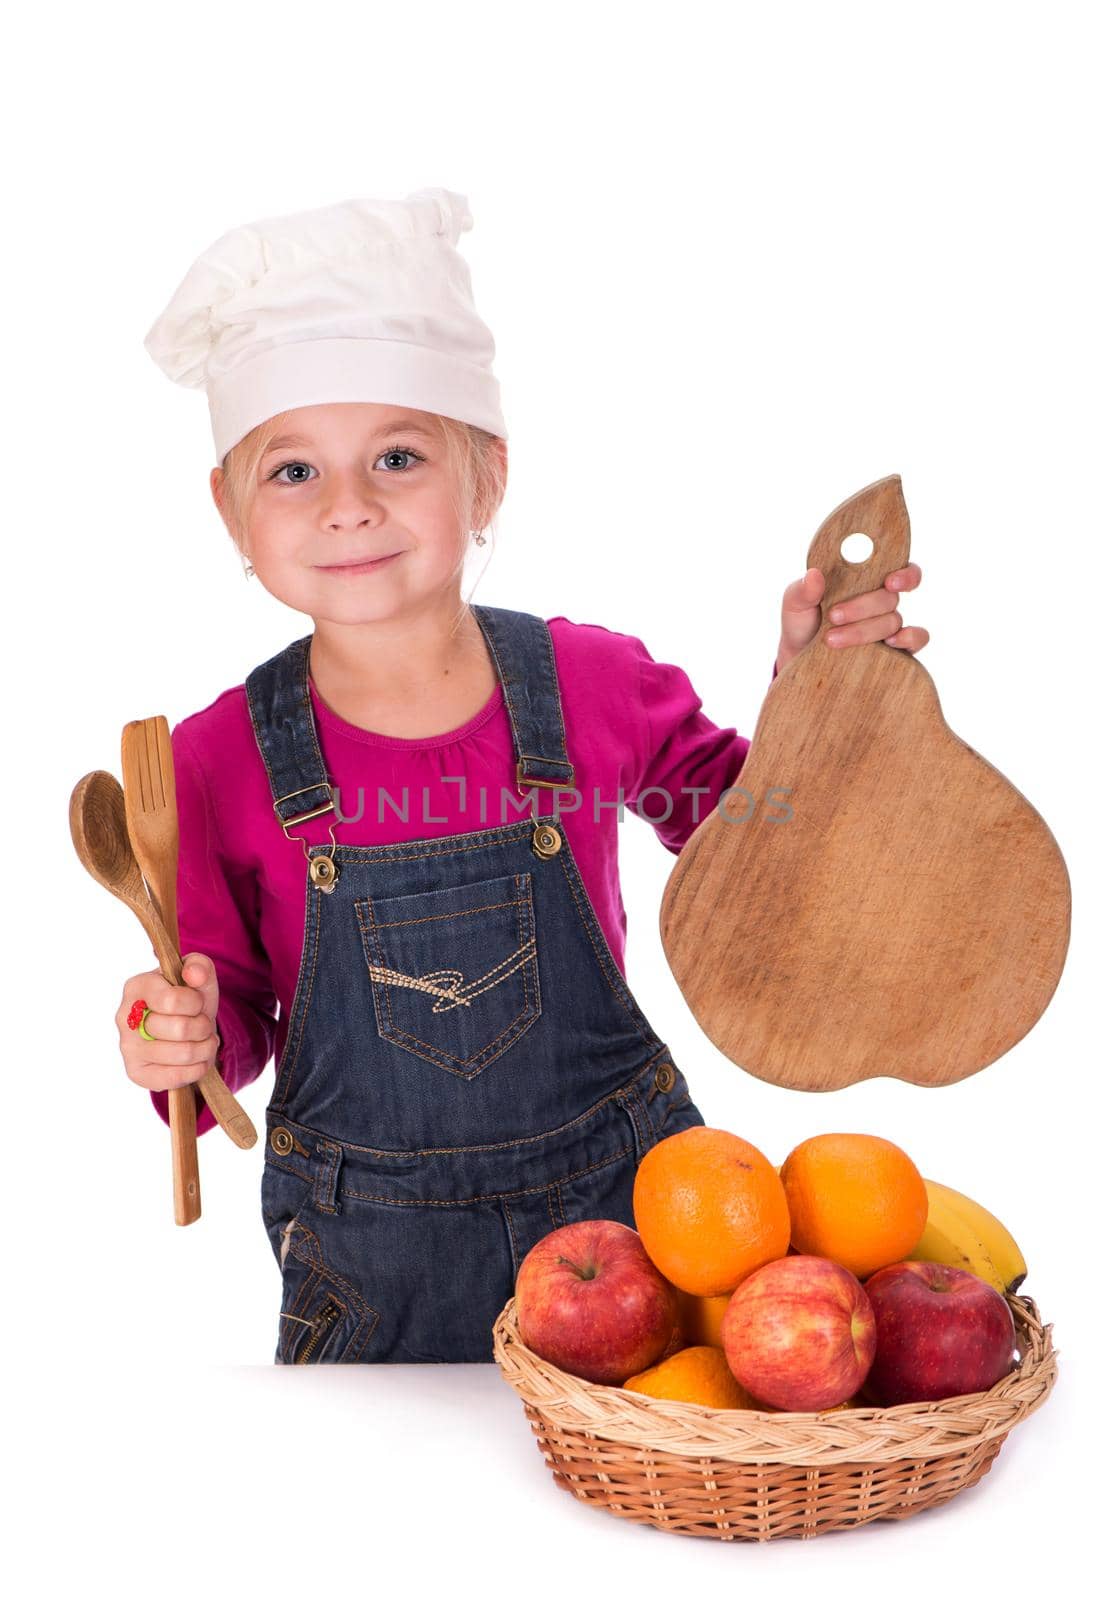 Close-up portrait of a little girl holding fruits and kitchen appliances